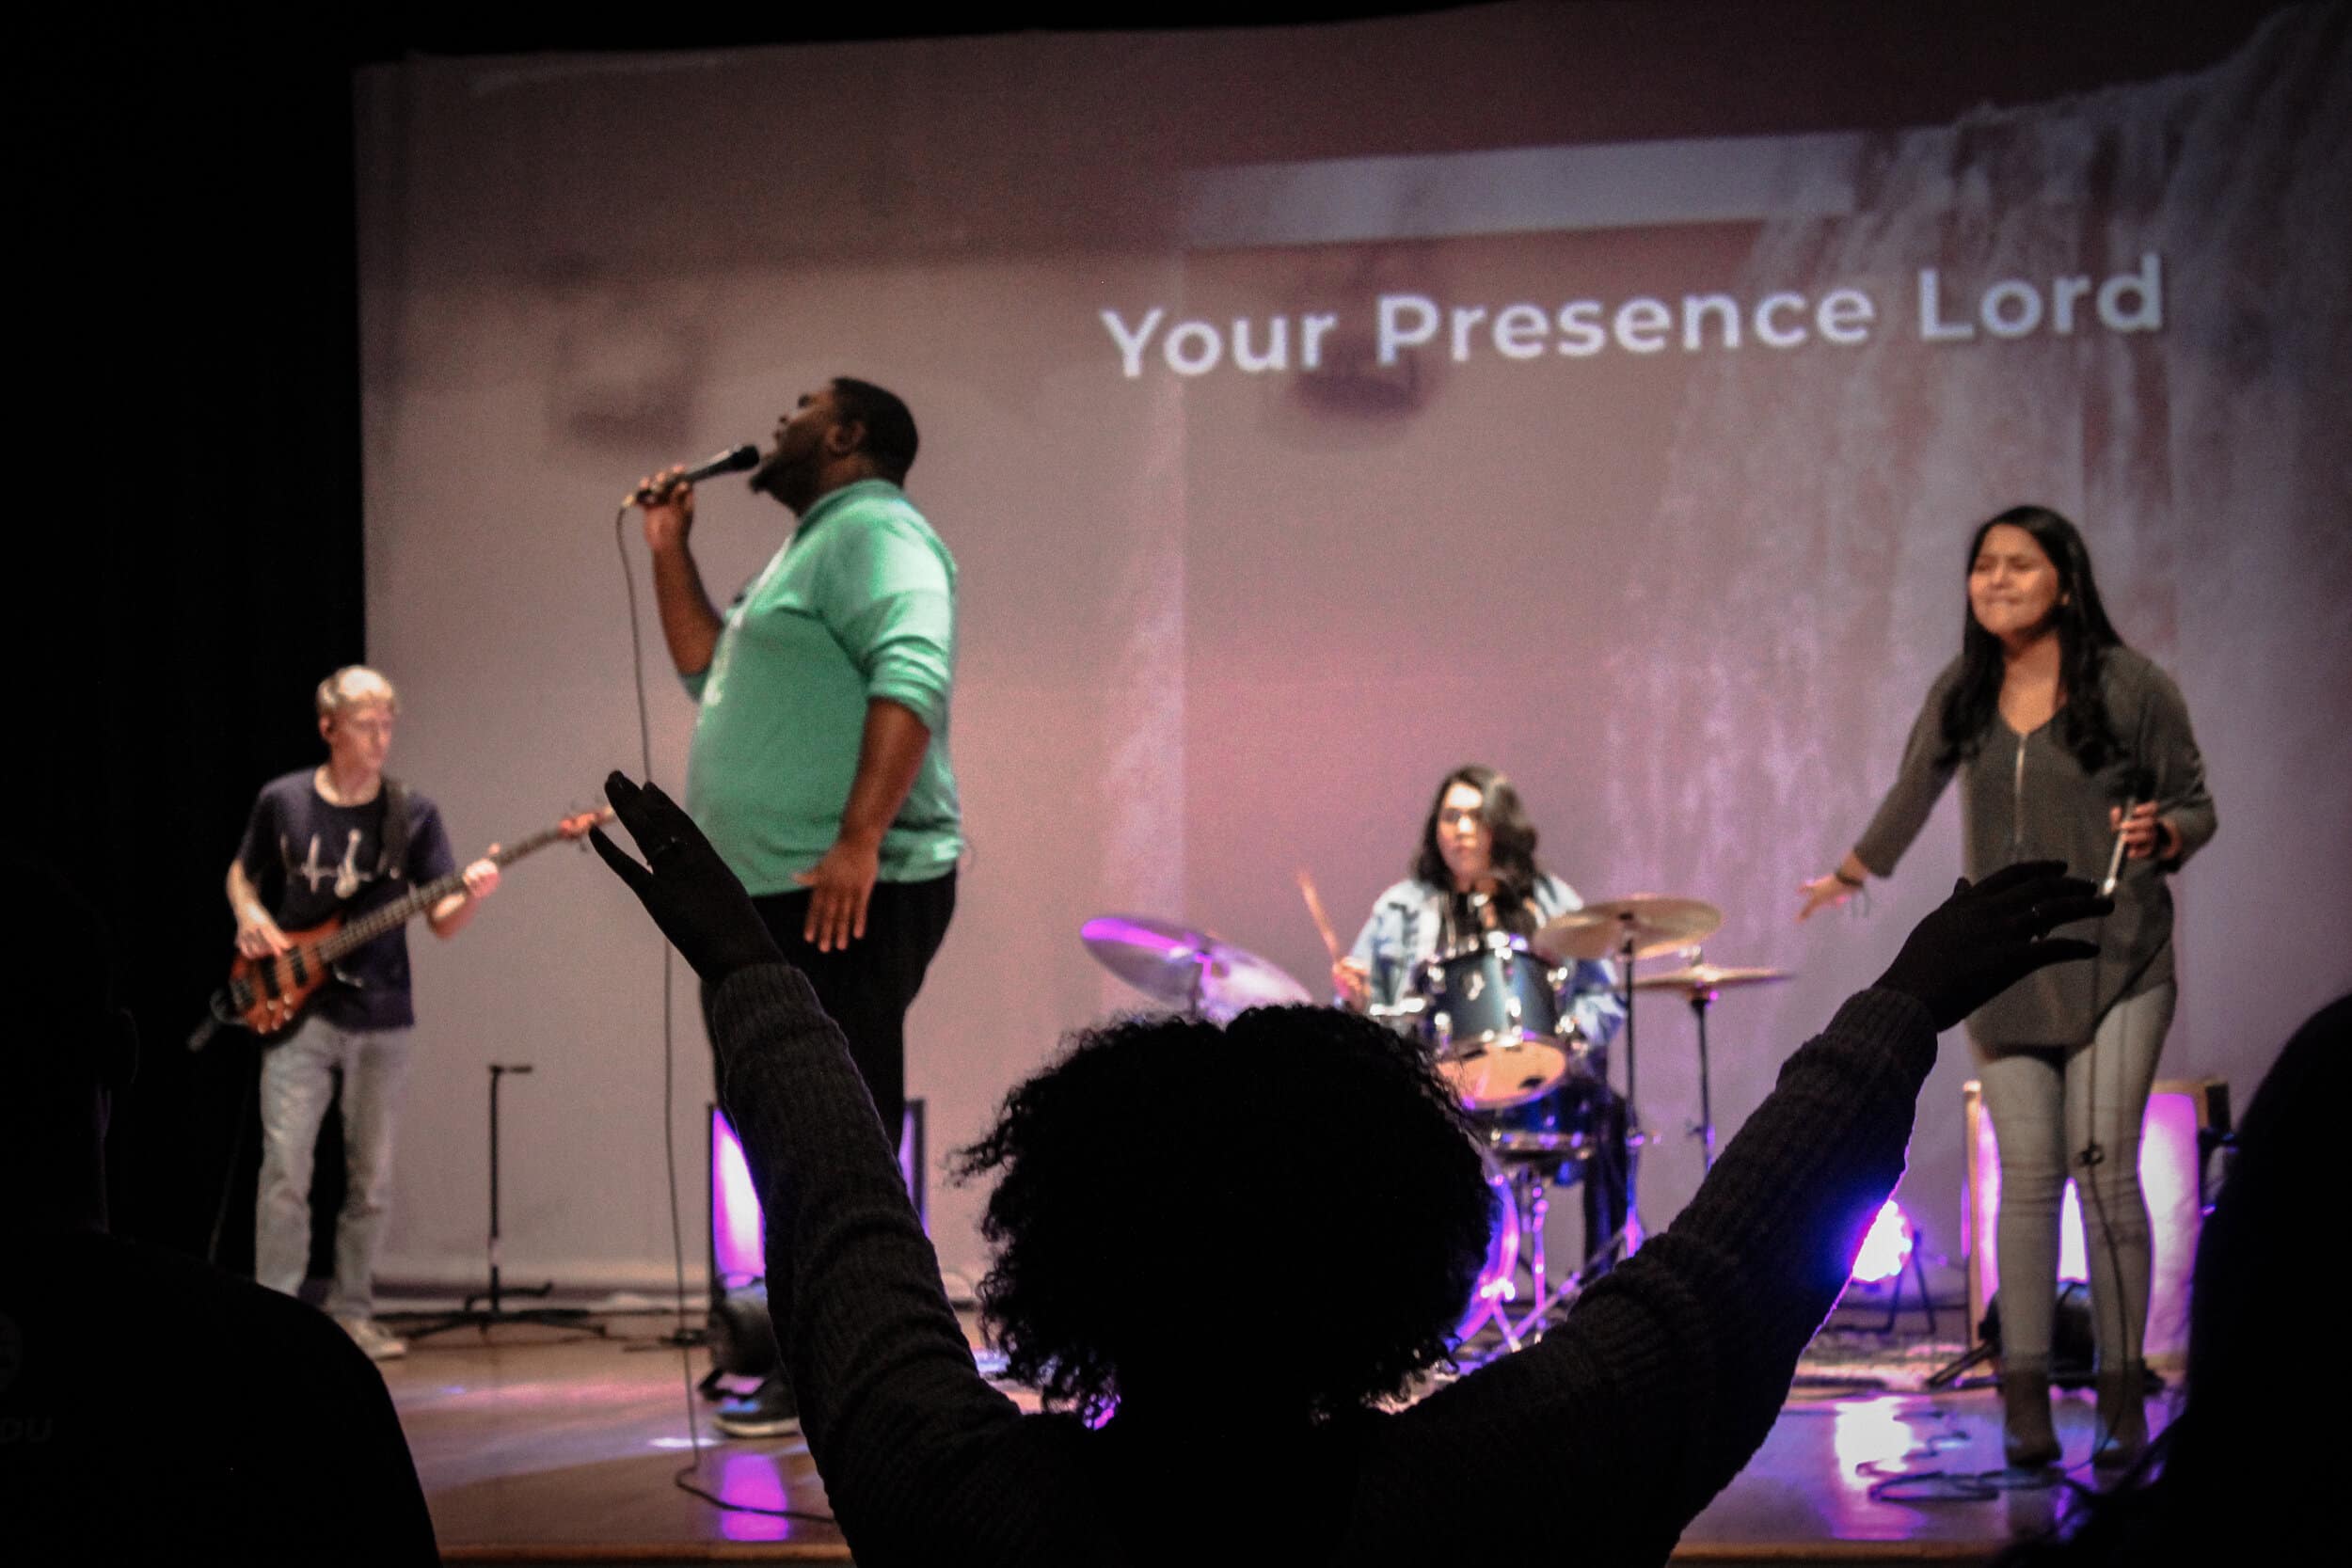 A student raising her hands during the performance of Holy Spirit by Jesus Culture.